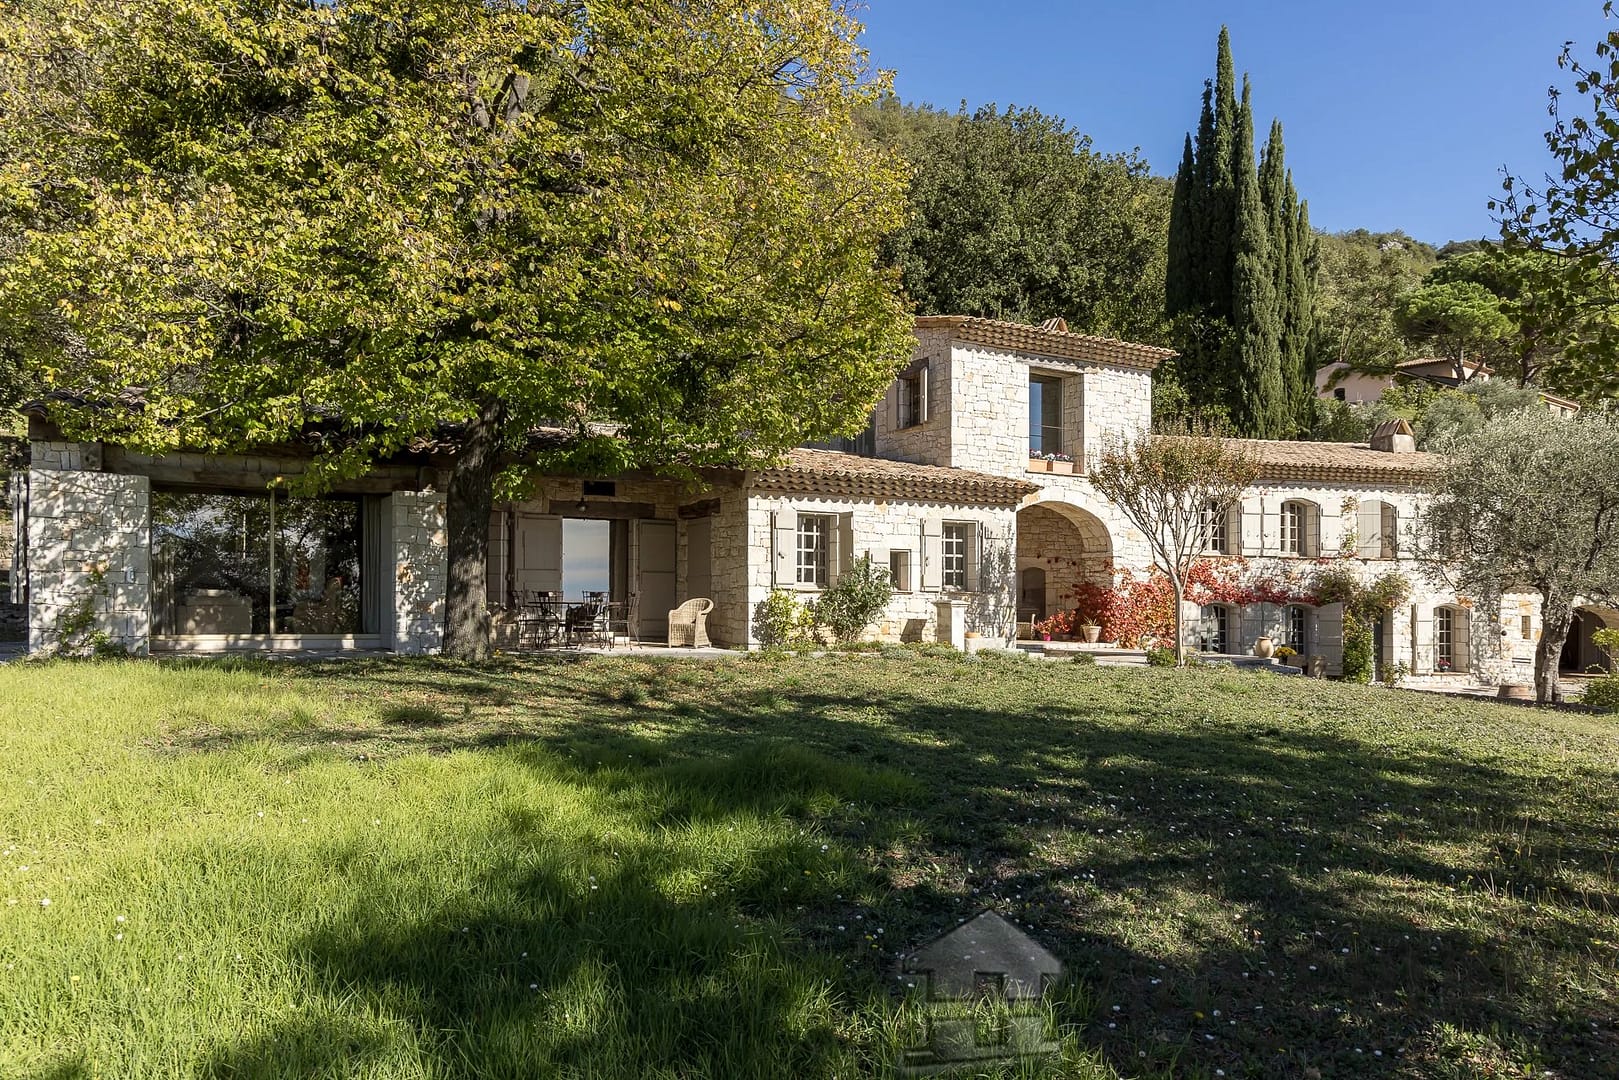 Villa/House For Sale in Chateauneuf Grasse 18